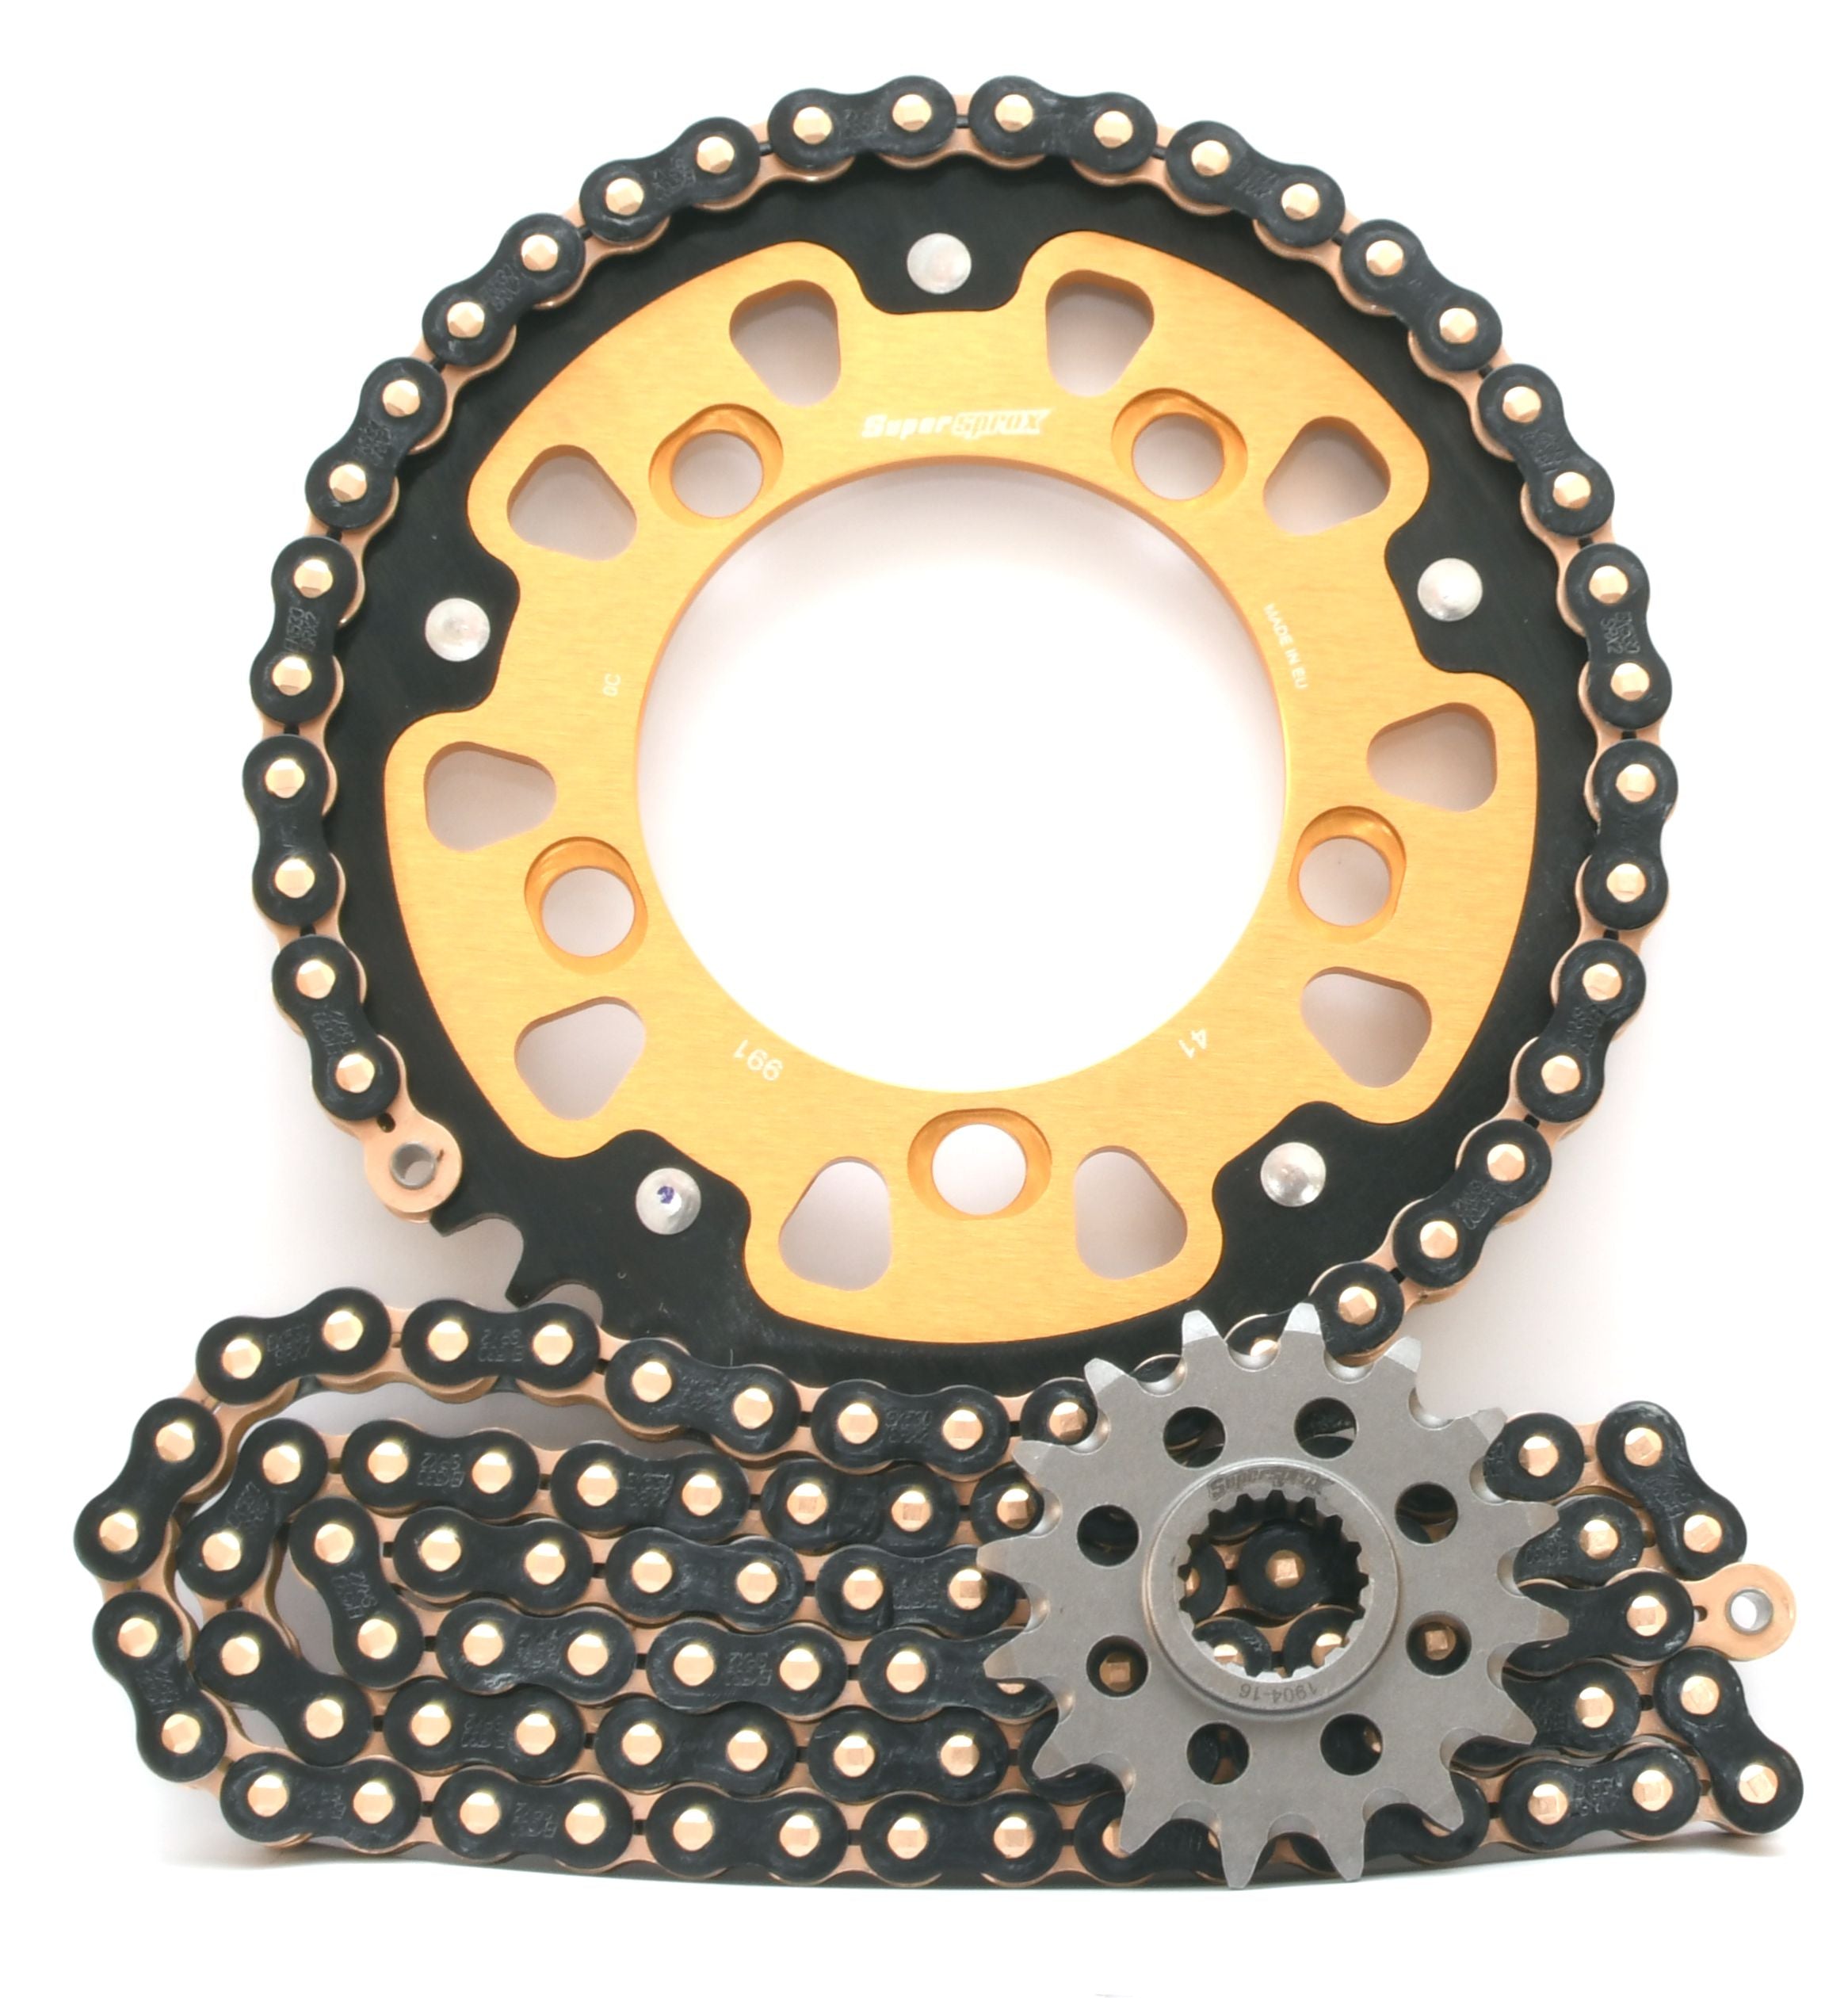 Supersprox Chain & Sprocket Kit for KTM 990 Superduke 05-13 (Inc R) - Choose Your Gearing